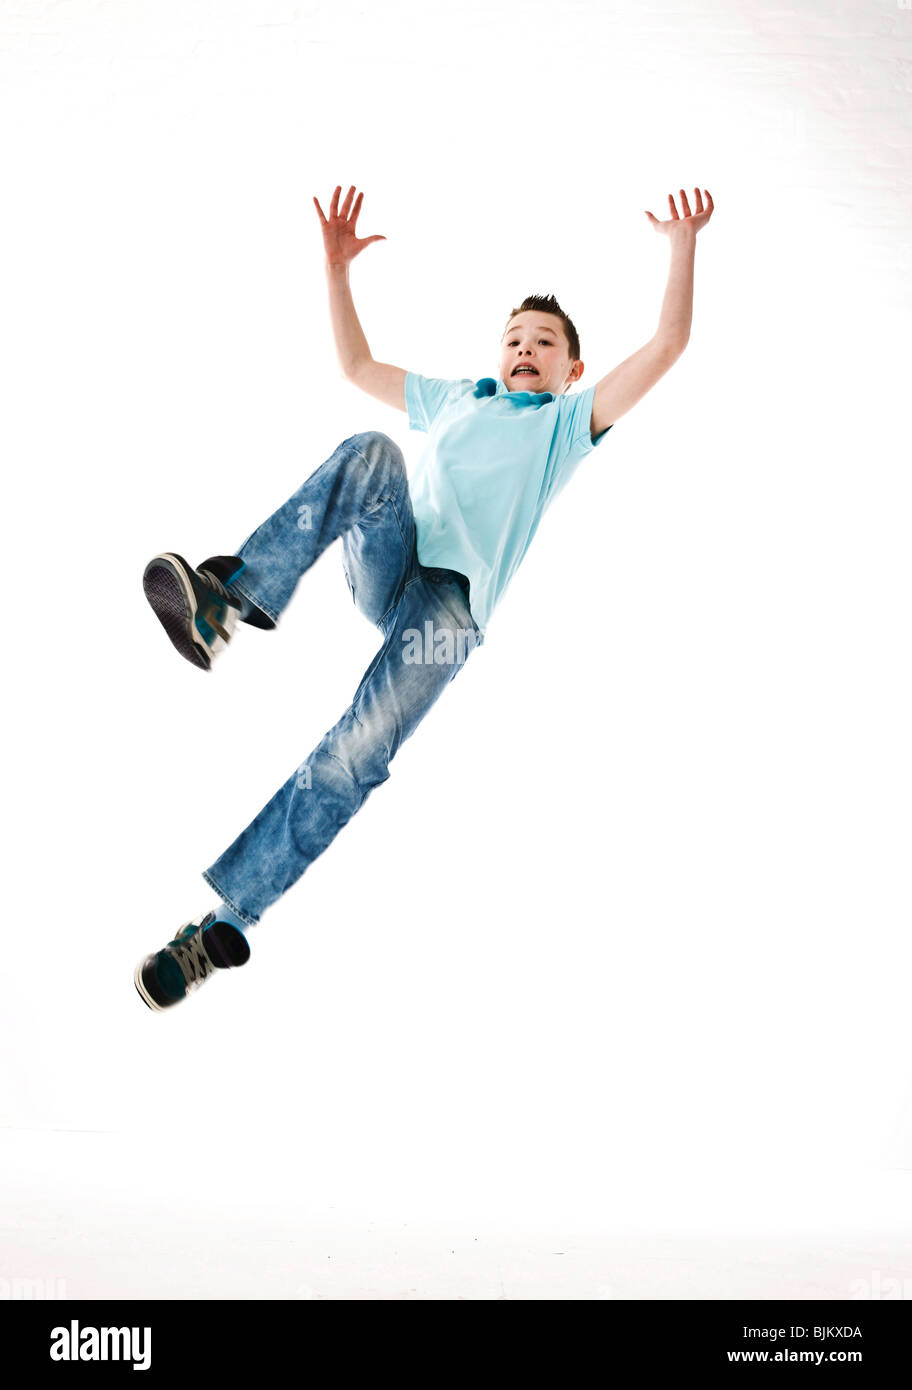 A boy leaping into the air Stock Photo